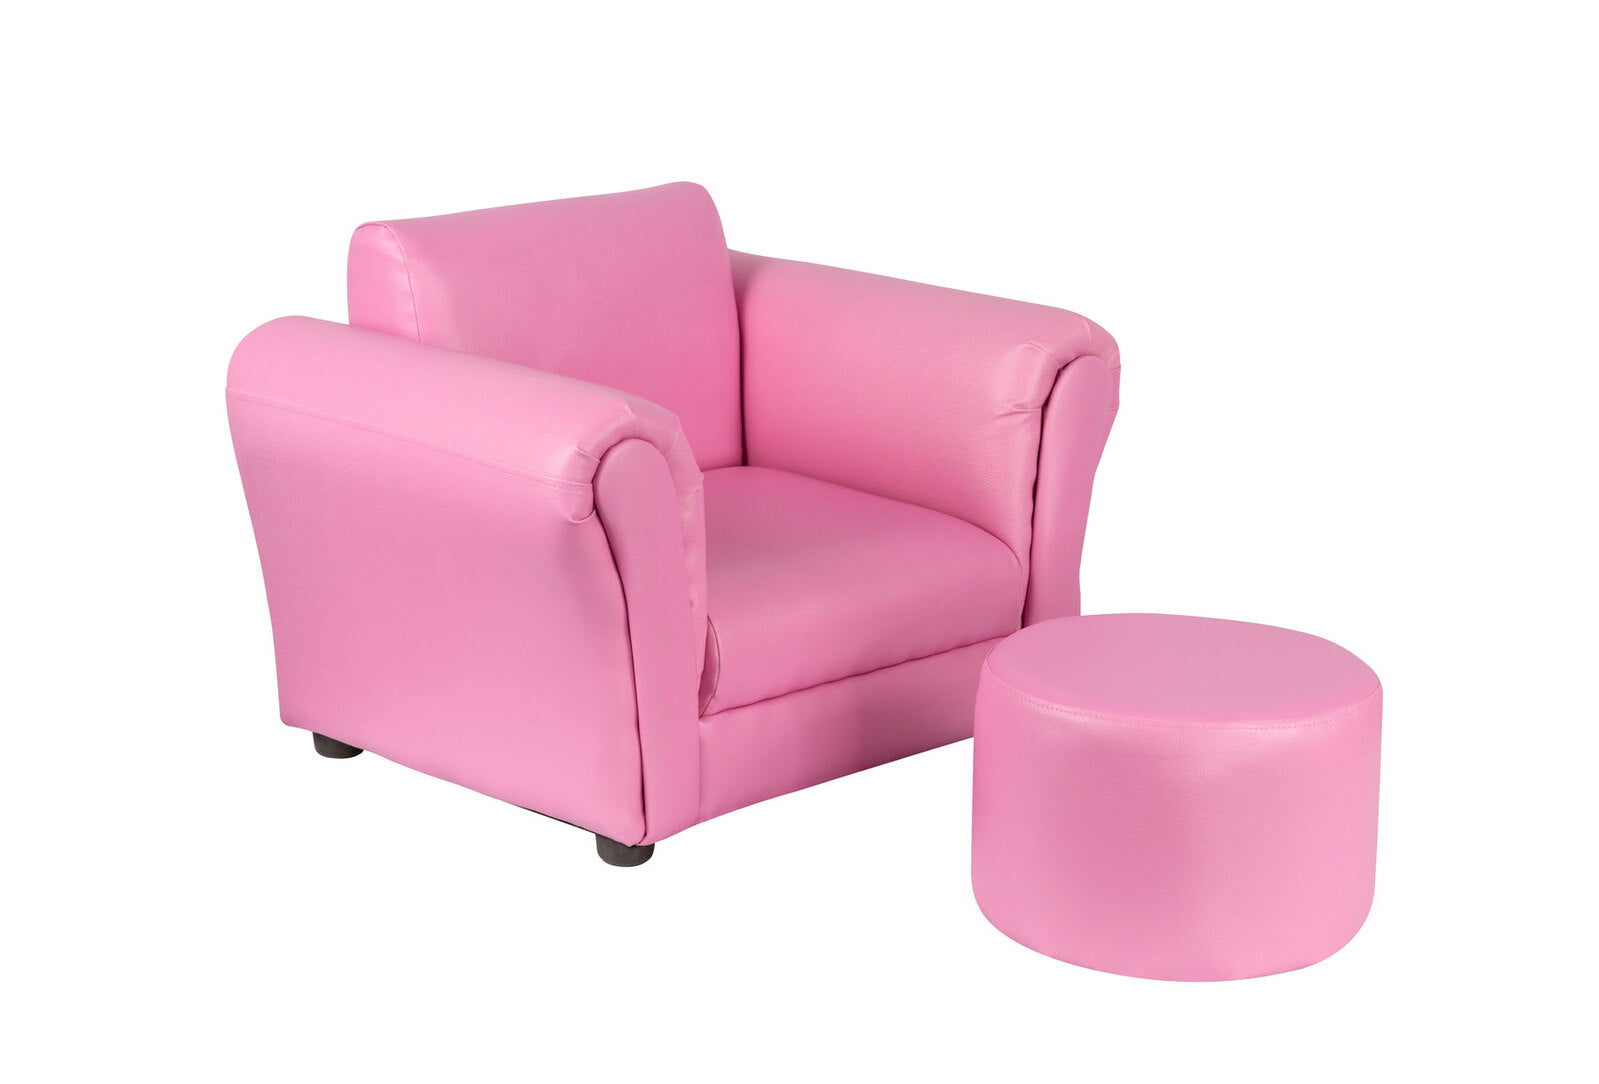 Kids Pink Couch Sofa Chair with Footstool in PU Leather